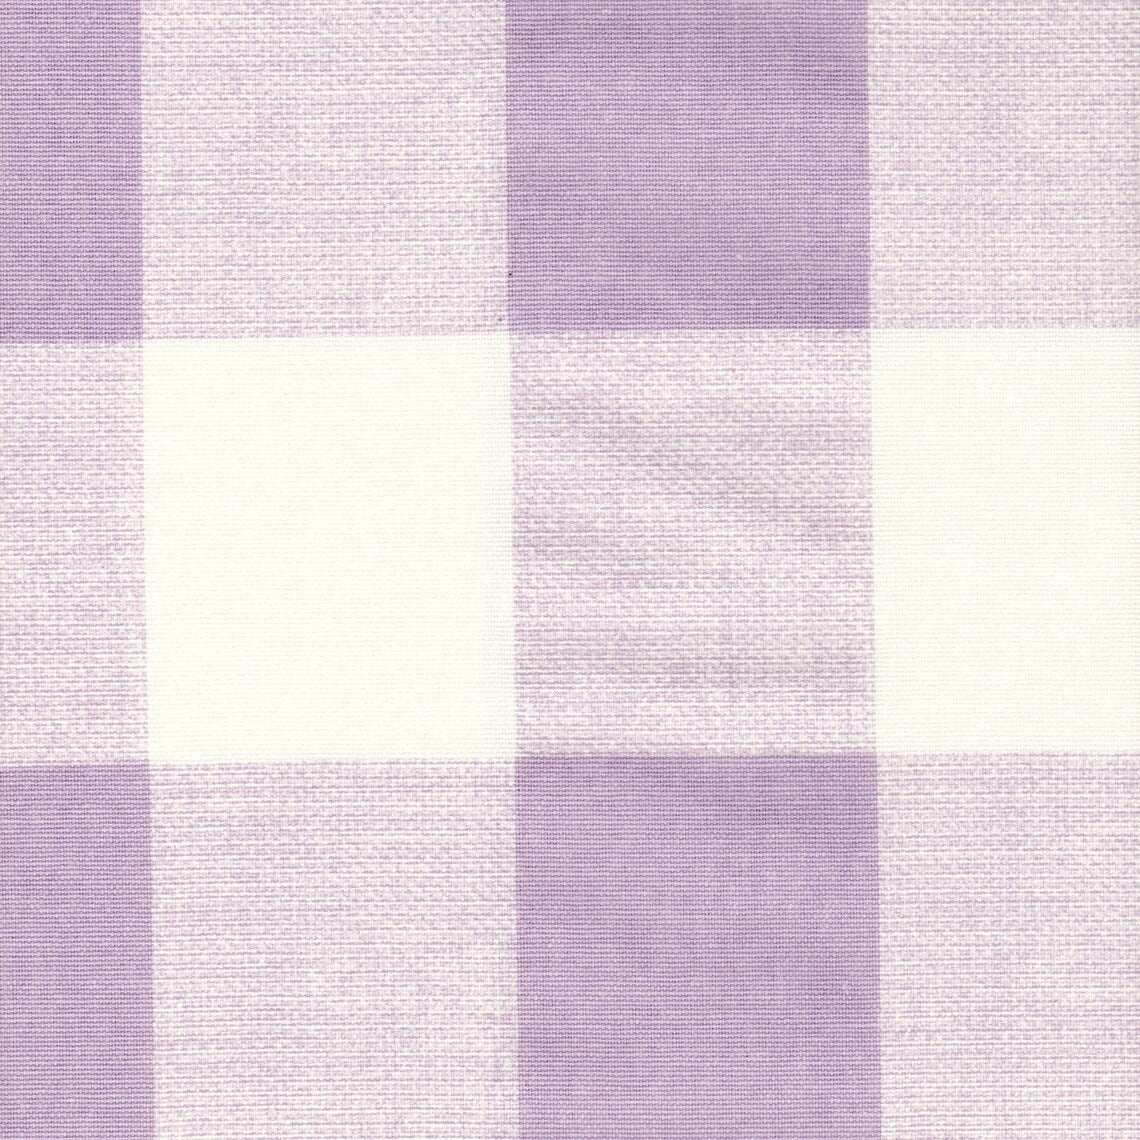 Tailored Crib Skirt in Anderson Orchid Lavender Buffalo Check Plaid Plaid